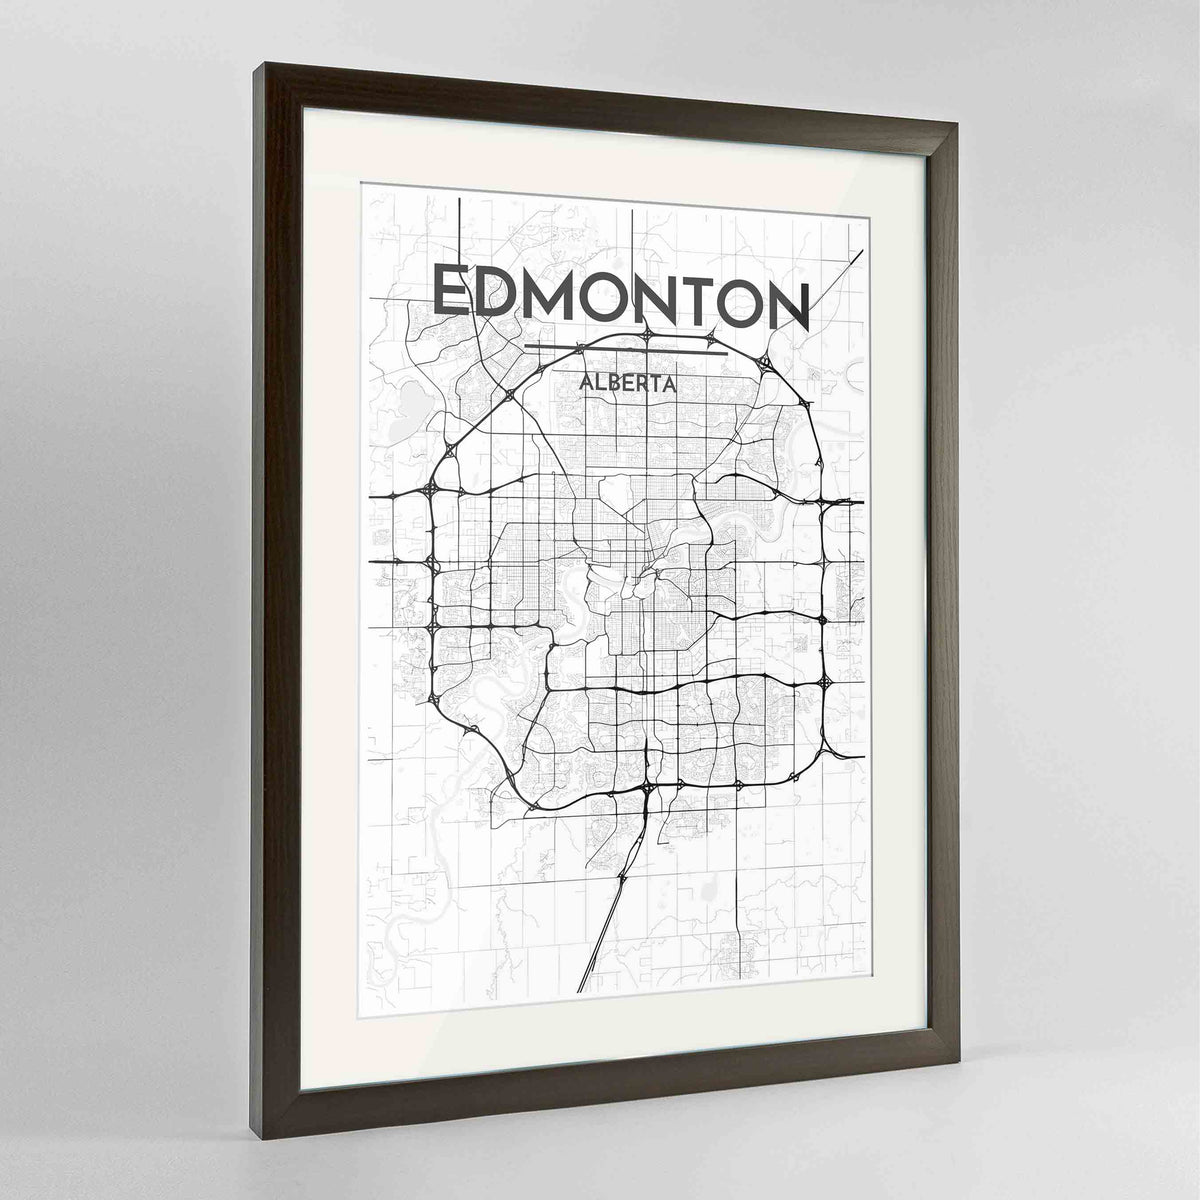 Framed Edmonton City Map 24x36&quot; Contemporary Walnut frame Point Two Design Group